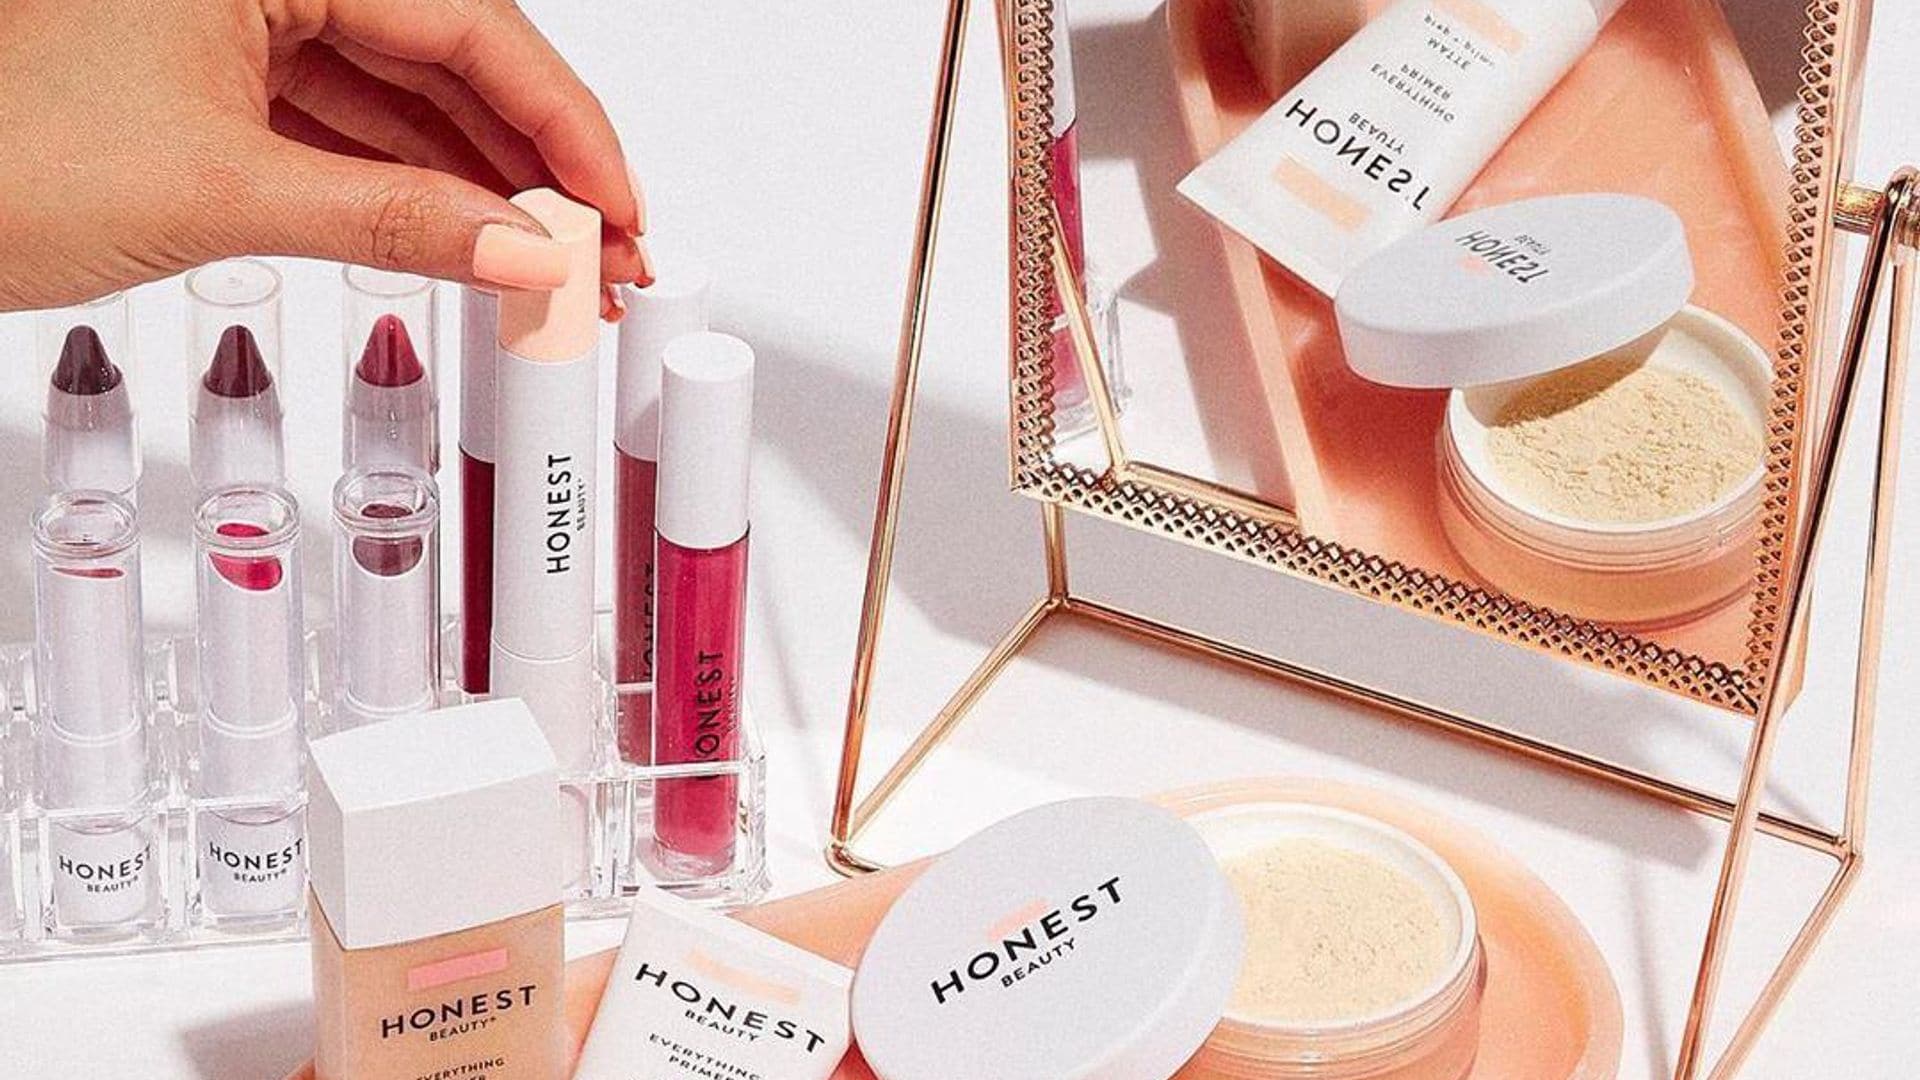 Top Memorial Day beauty deals to shop from home